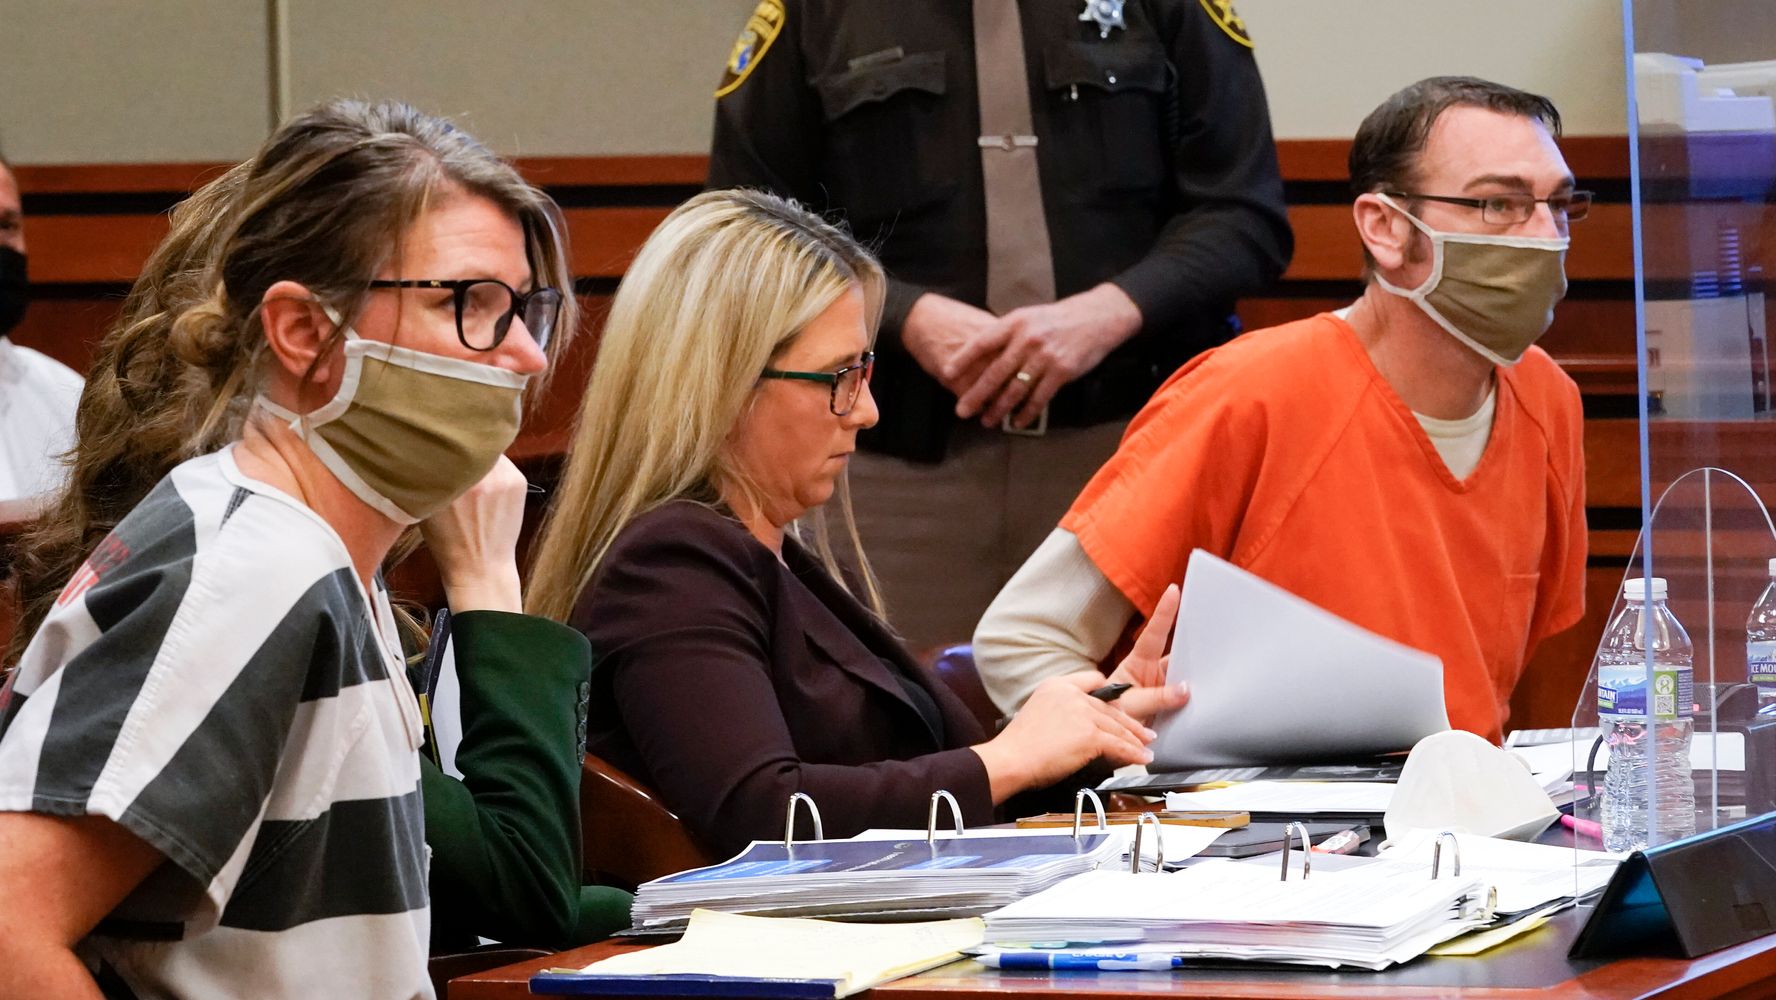 Judge Rules Michigan School Shooter’s Name Can’t Be Used In Parents’ Trial